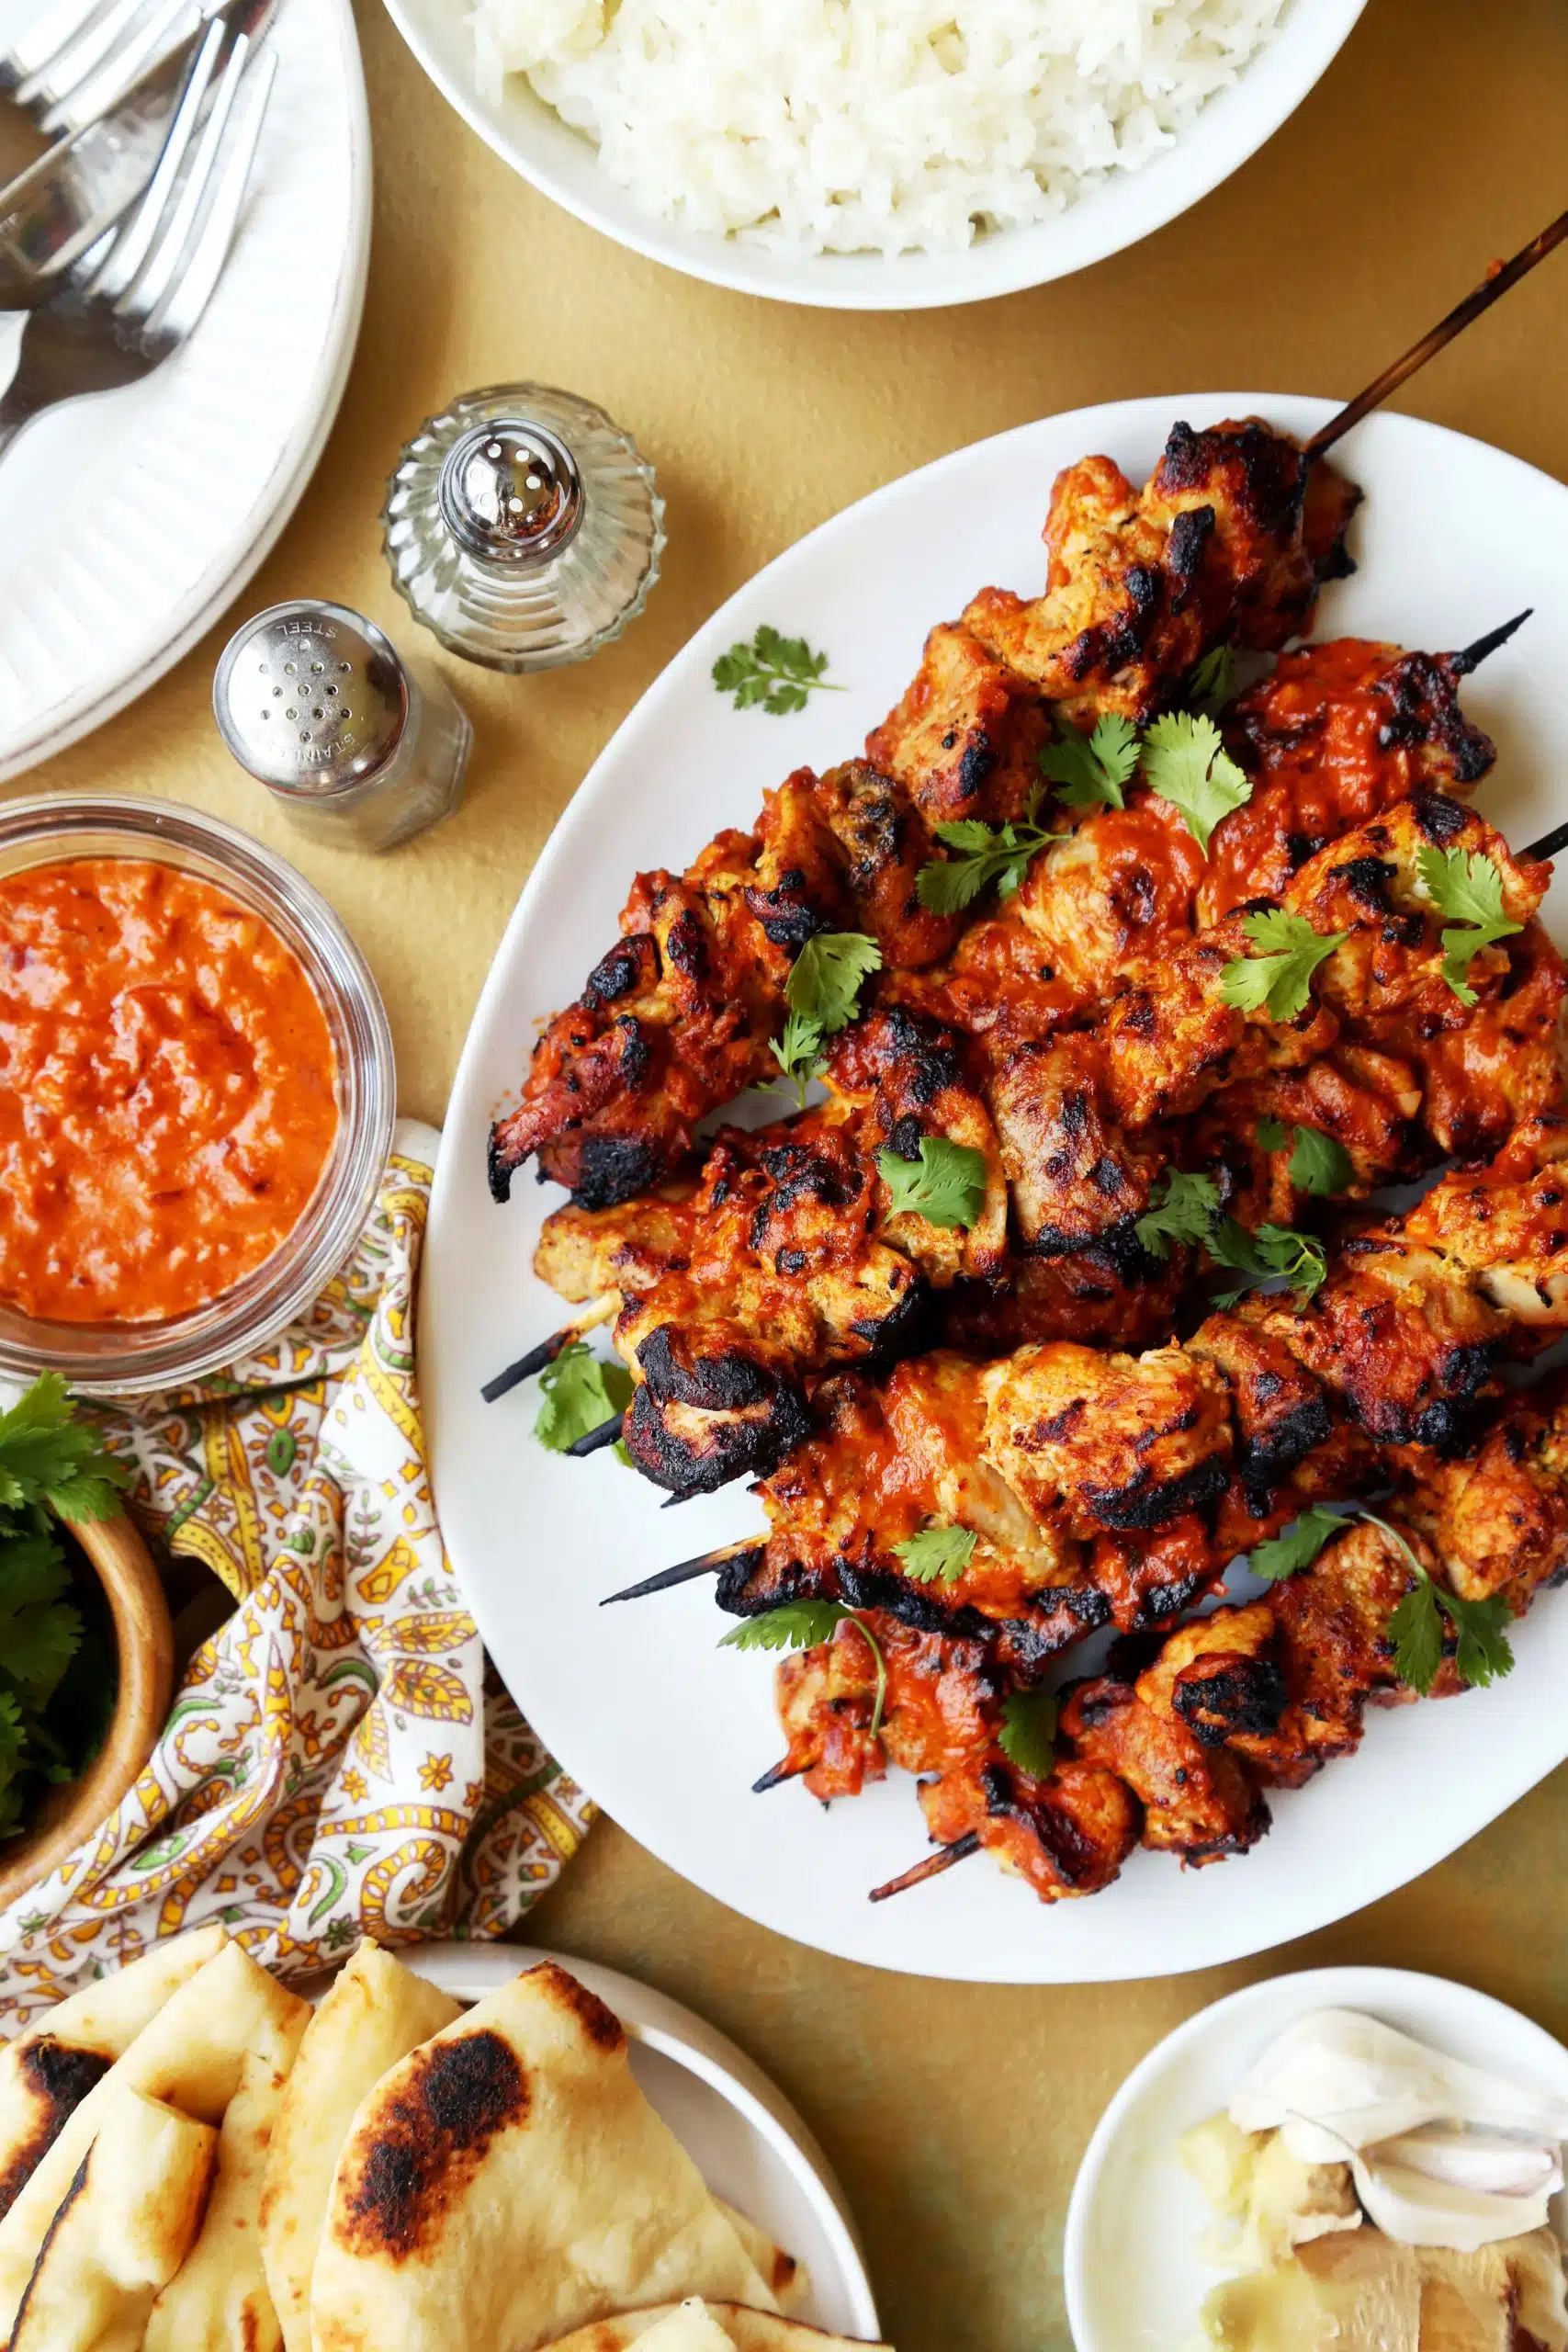 A platter of succulent grilled kebabs served with sides of naan bread, rice, and dipping sauce, ready for a flavorful feast.